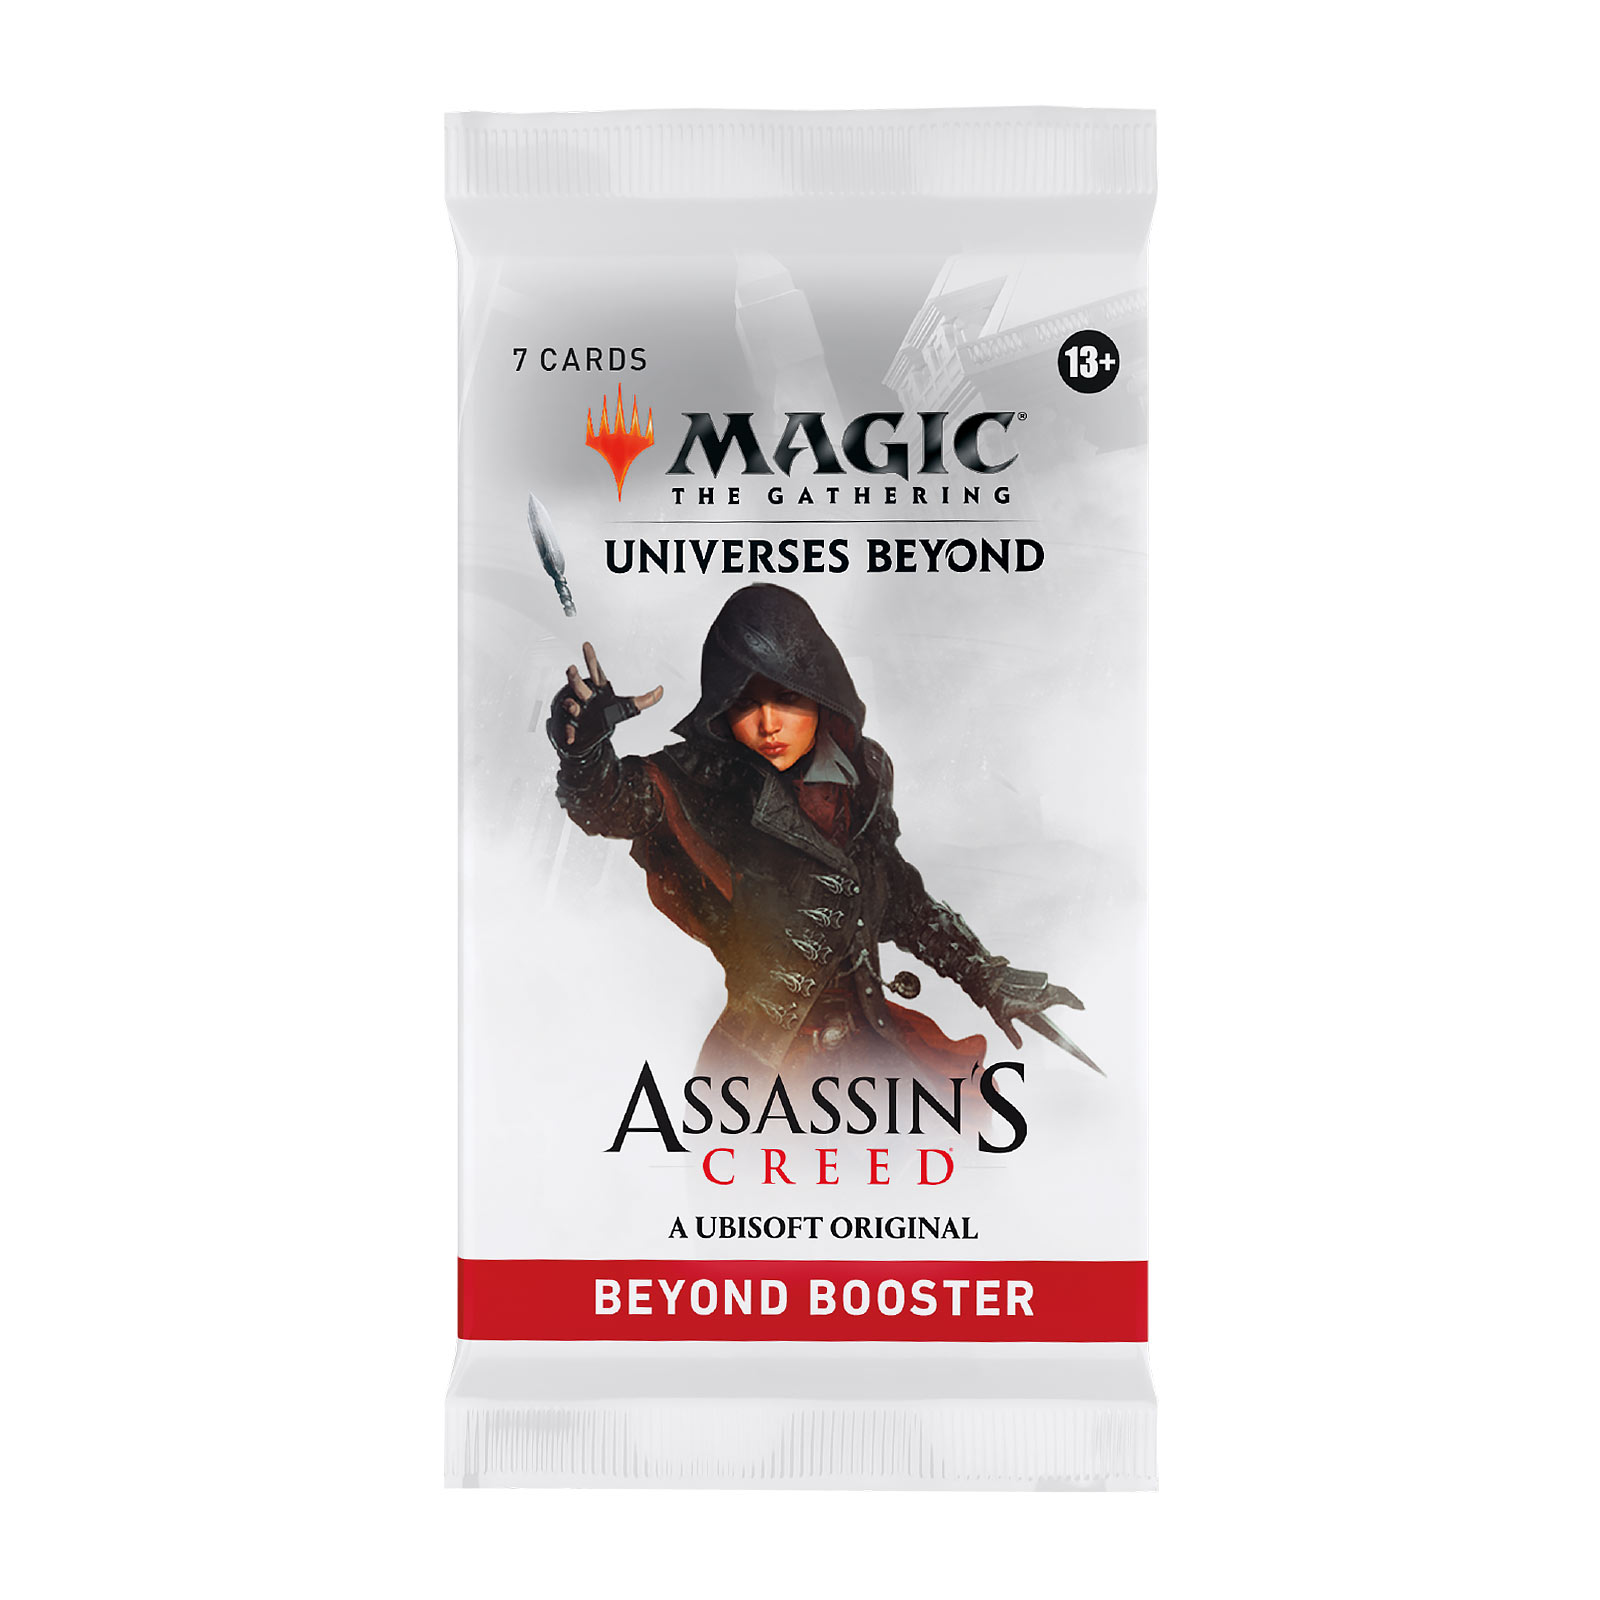 Assassin's Creed Beyond Booster englische Version - Magic The Gathering